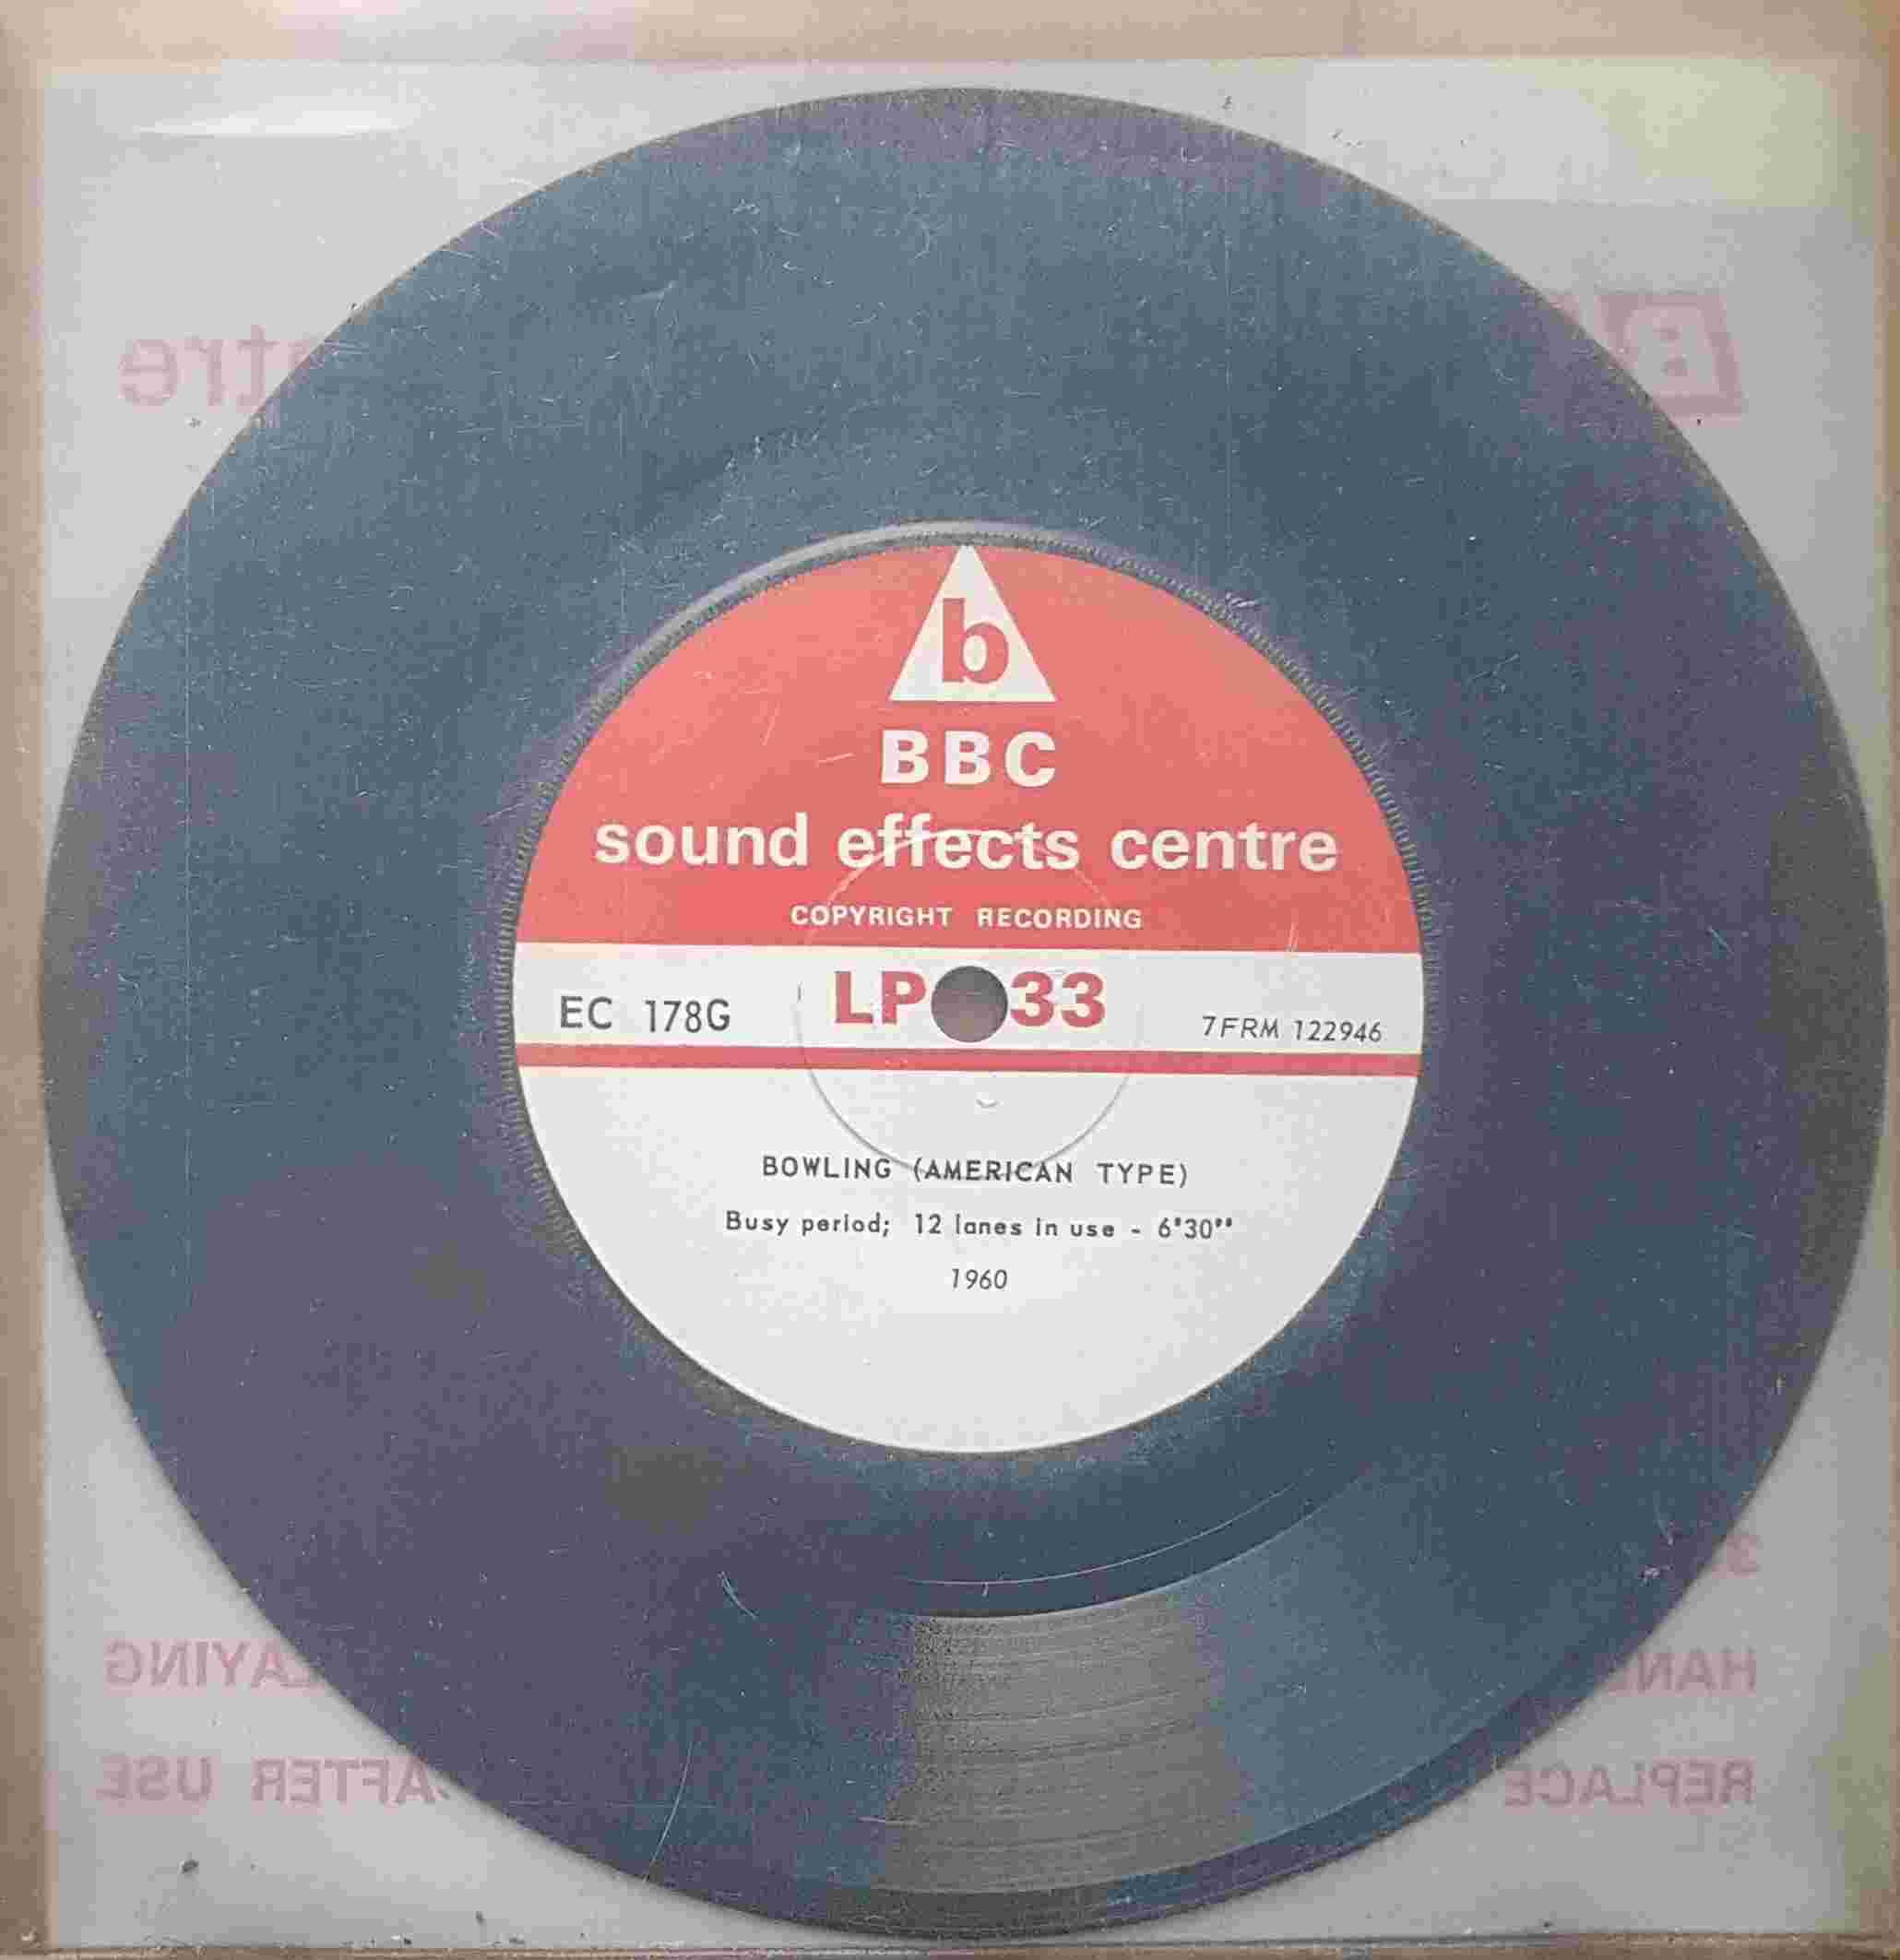 Picture of EC 178G Bowling (American type) by artist Not registered from the BBC records and Tapes library